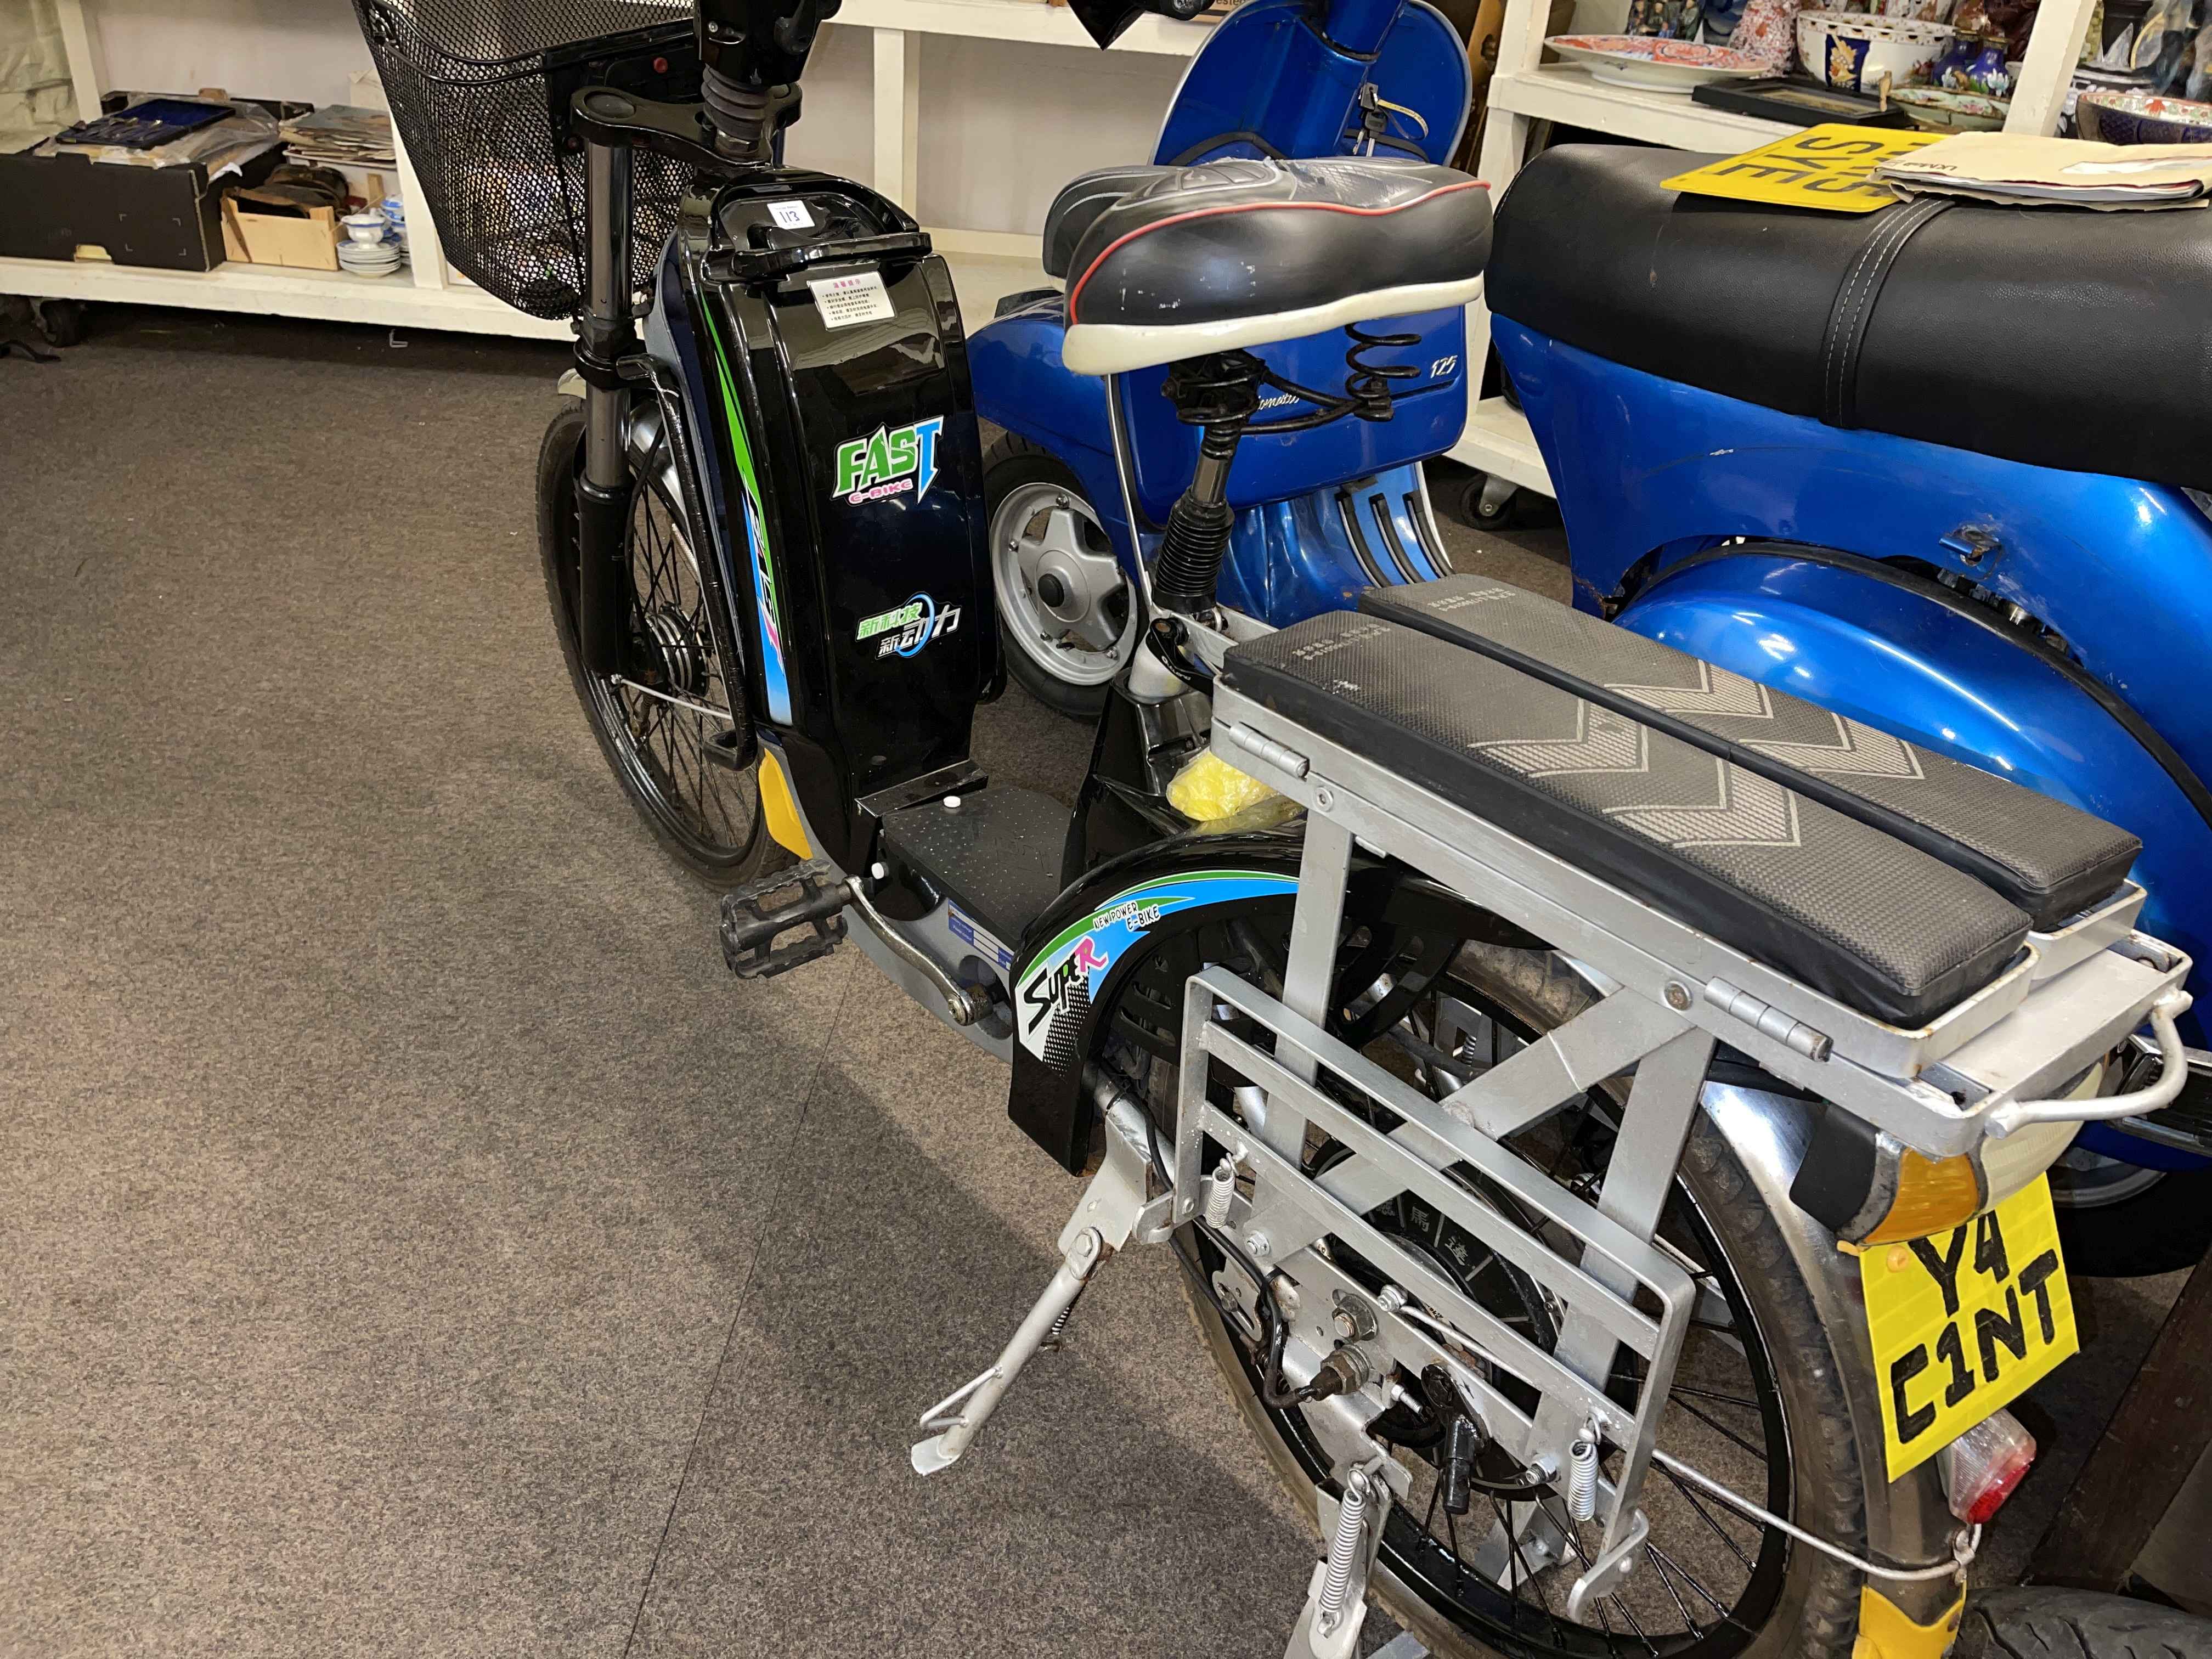 Schenzhen 200W electric cycle and a Renthal electric cycle. - Image 3 of 3